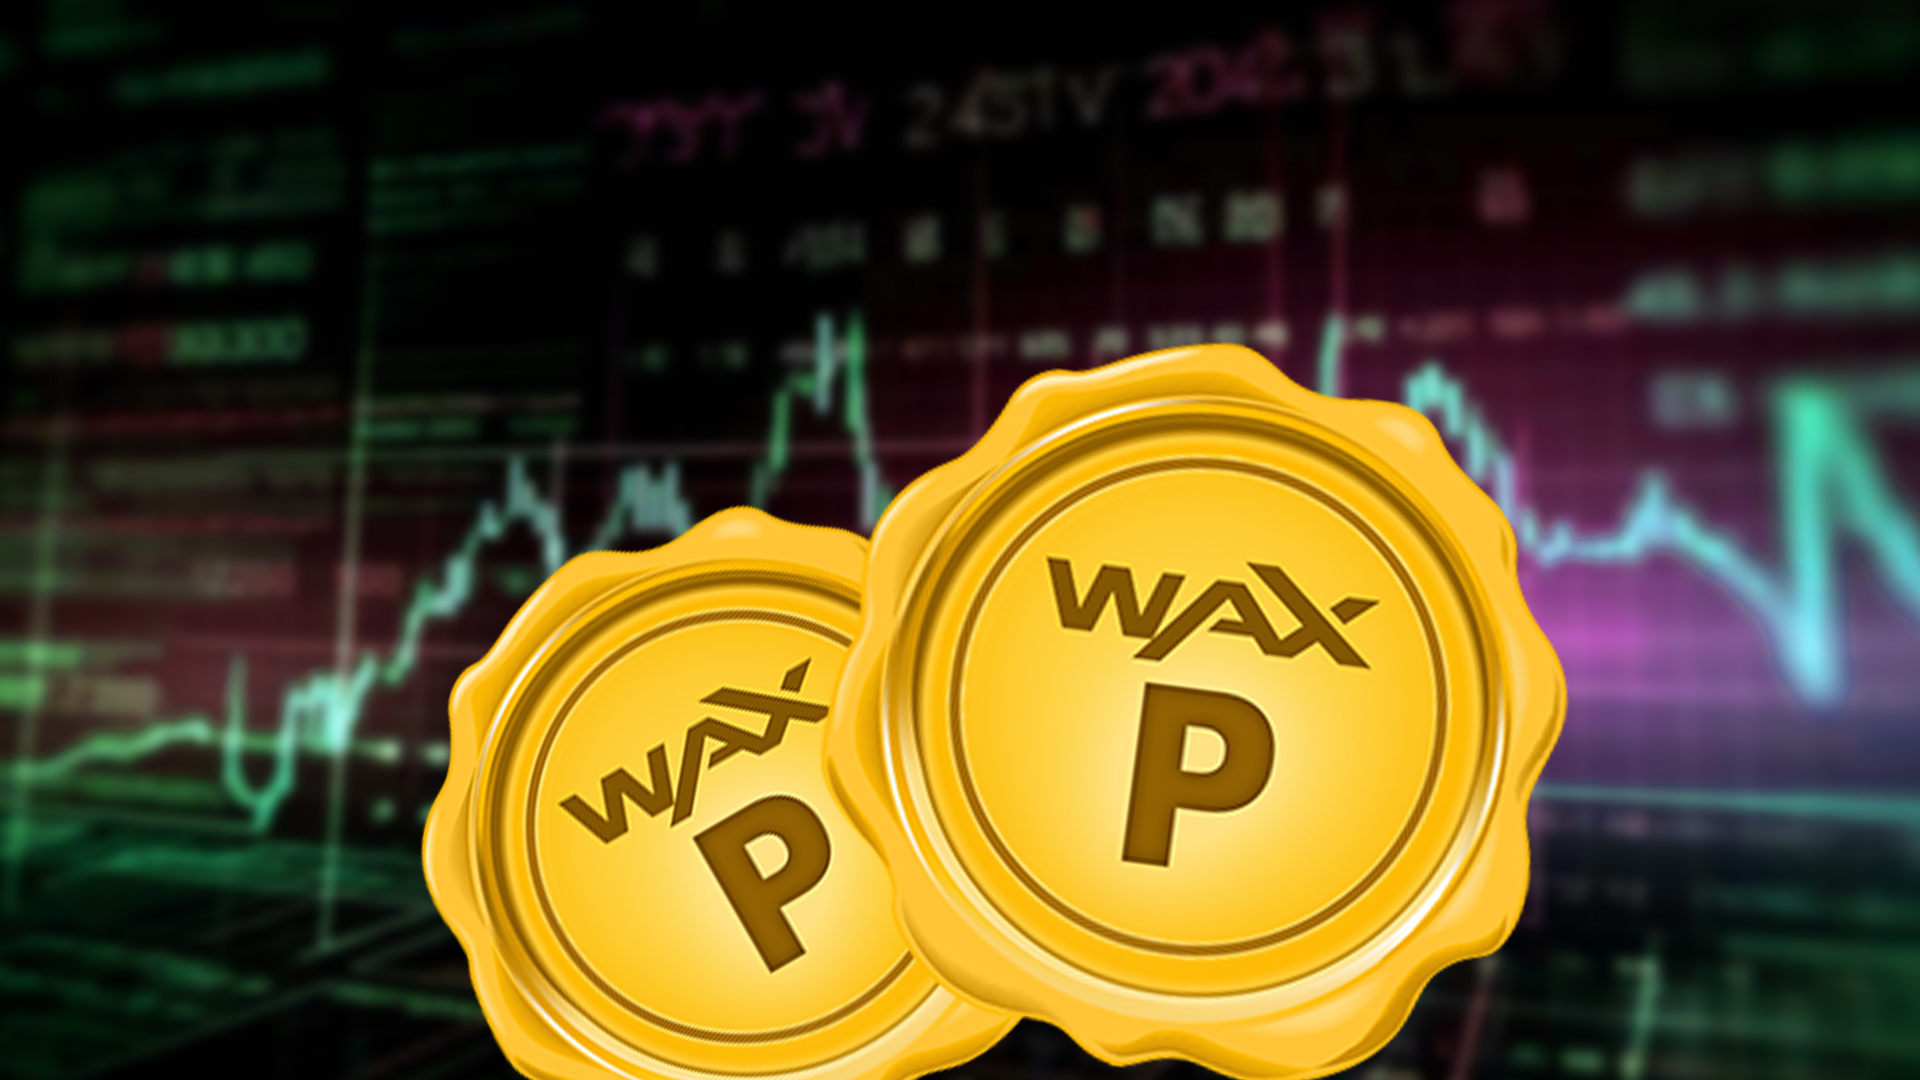 WAXP Technical Analysis: WAXP creating potential double bottom